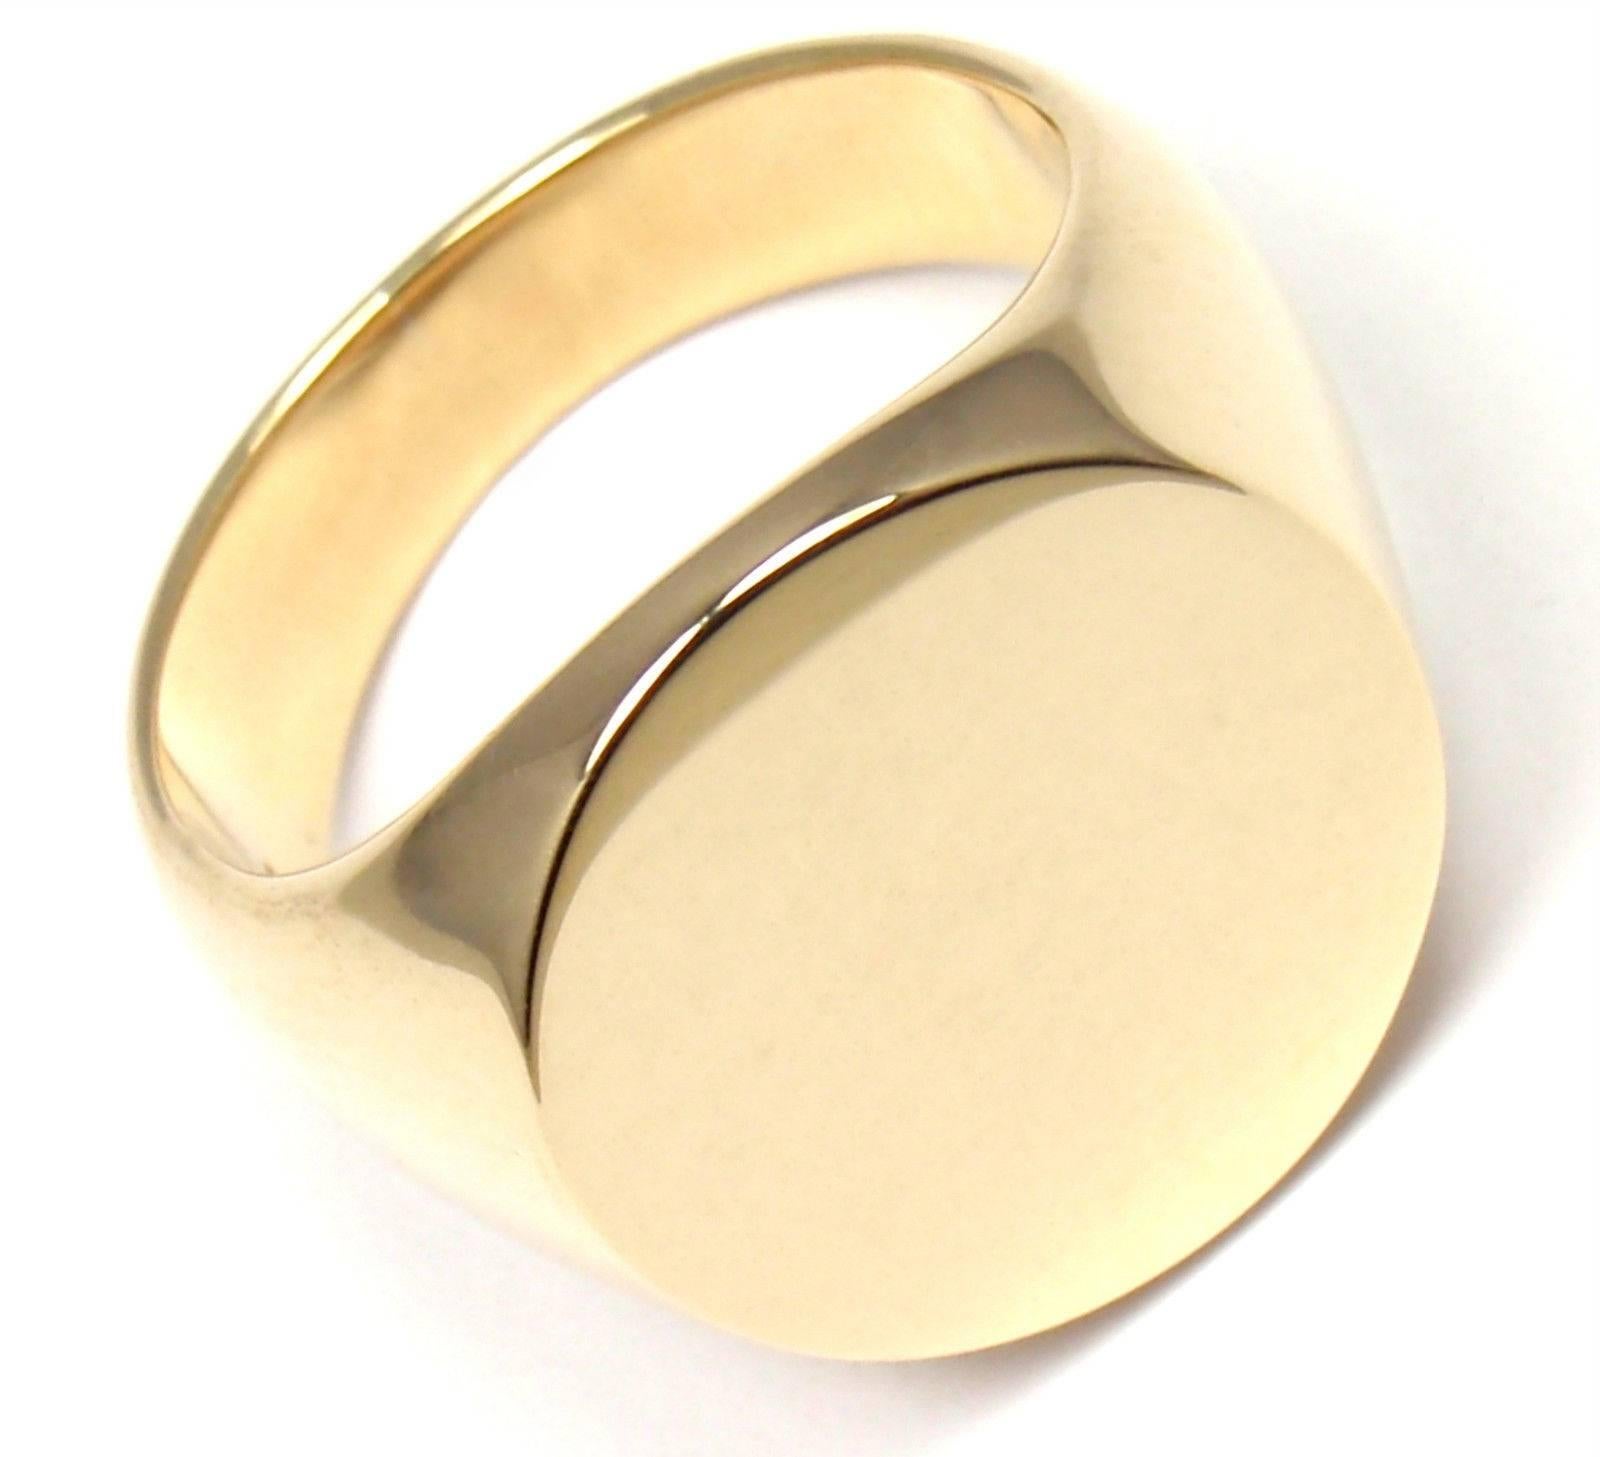 18k Yellow Gold Oval Shape Vintage Signet Ring By Cartier.

Details:
Size: 9
Width: 19mm
Weight: 20.2 grams
Stamped Hallmarks: Cartier 18k

*Free Shipping within the United States*

YOUR PRICE: $3,500

T1537nle